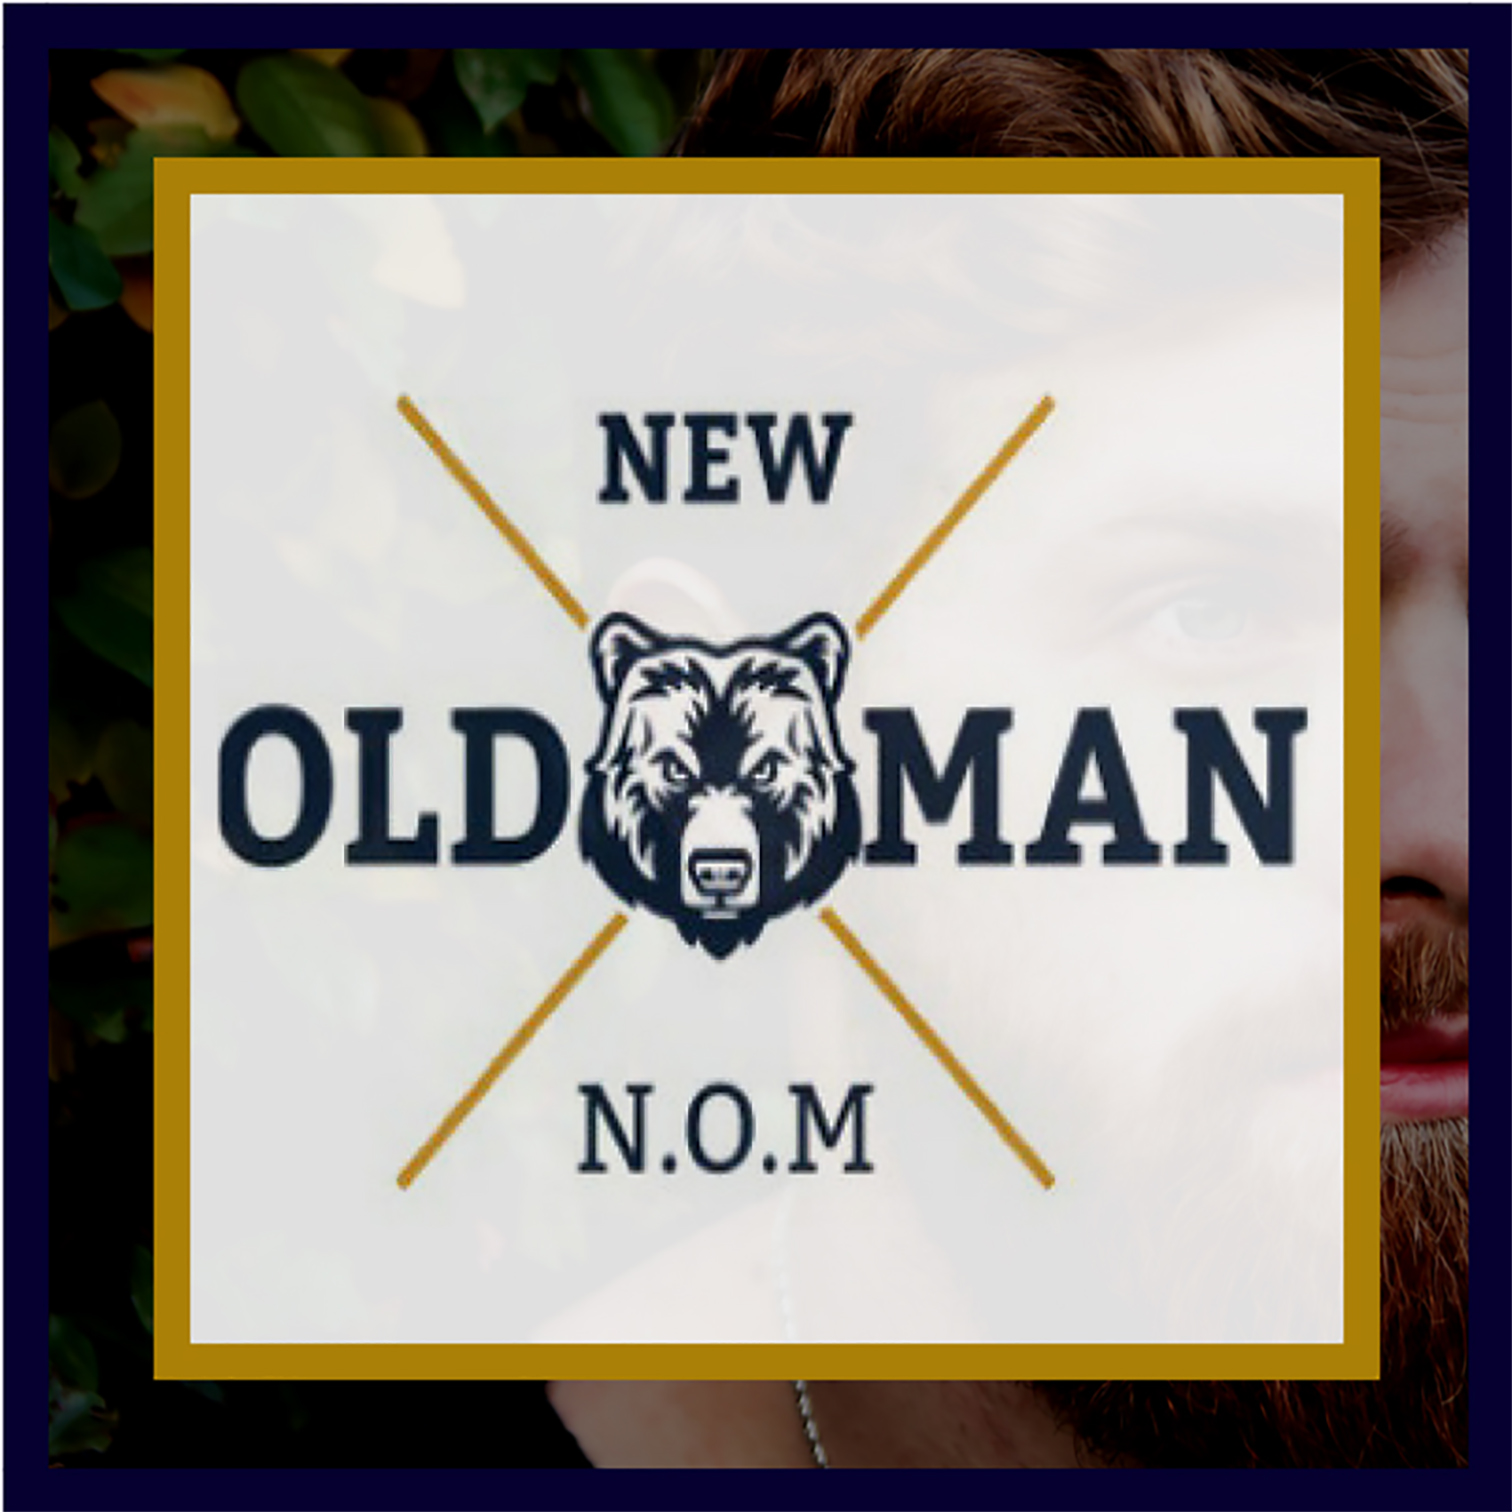 New Old Man Cast